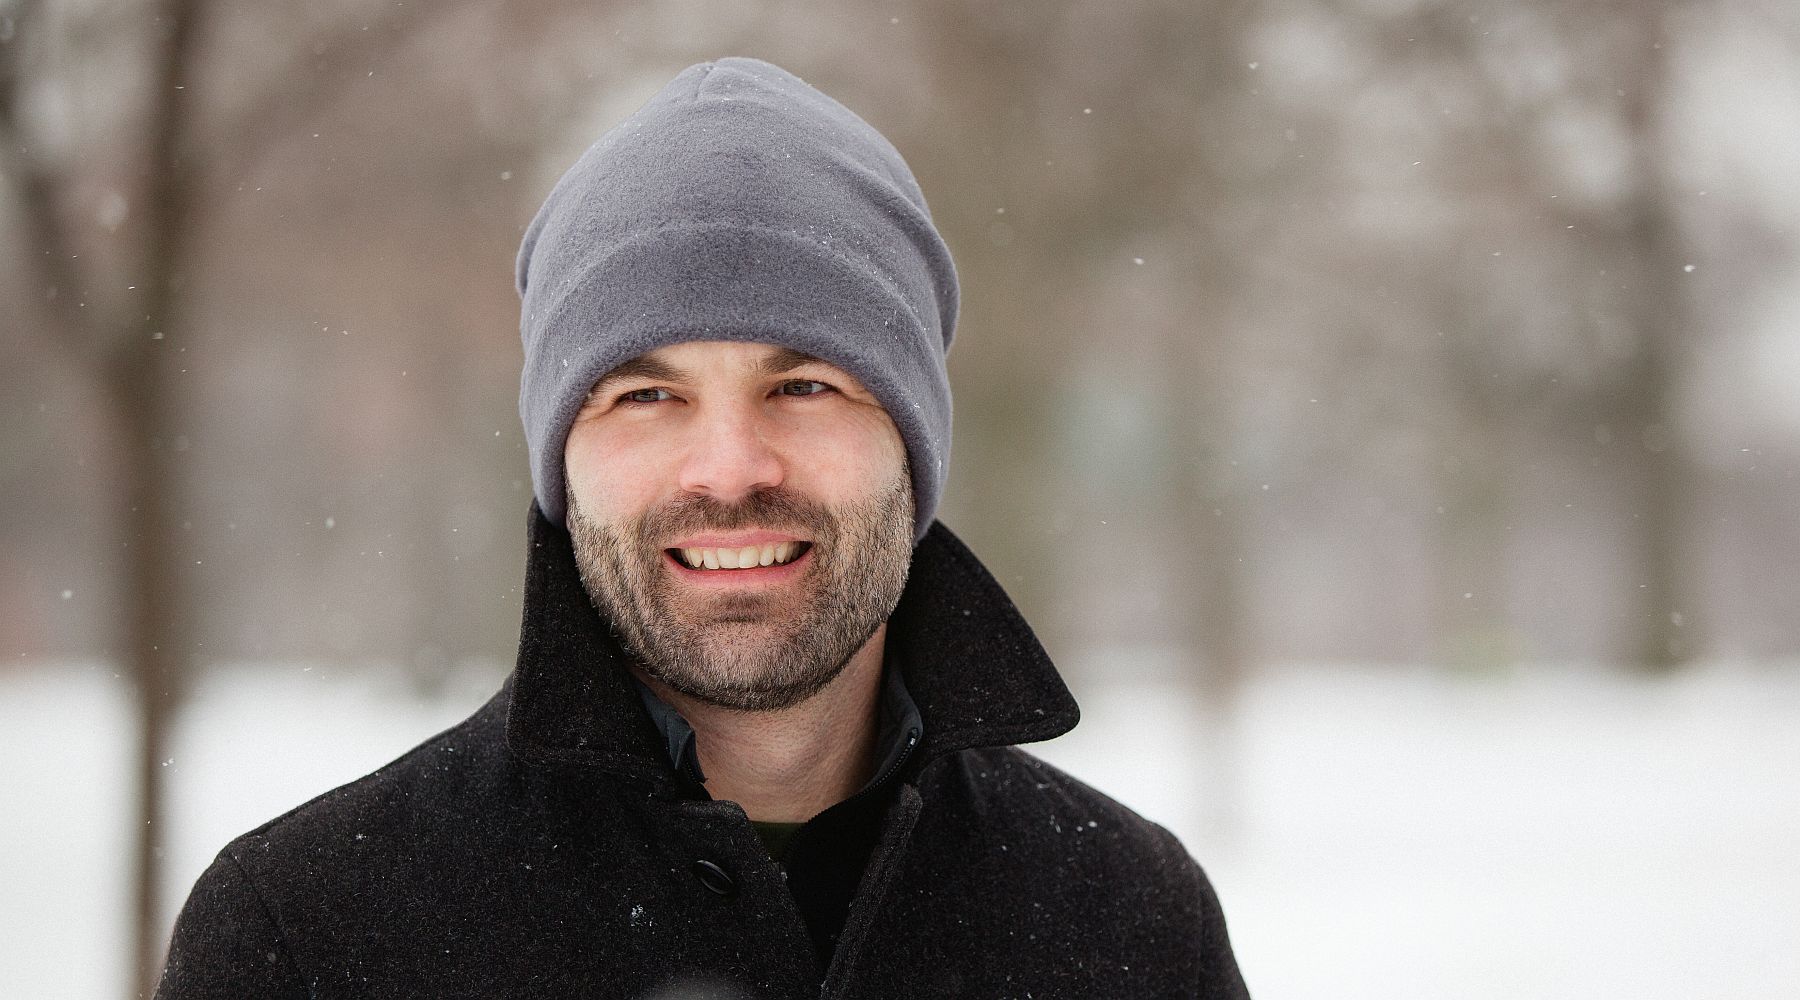 polartec classic 300 series fleece.  incredibly warm gear for cold weather-best hat for winter-neck gaiters and blankets.  If you work outside you need this hat. Made in Canada by puffin Gear-